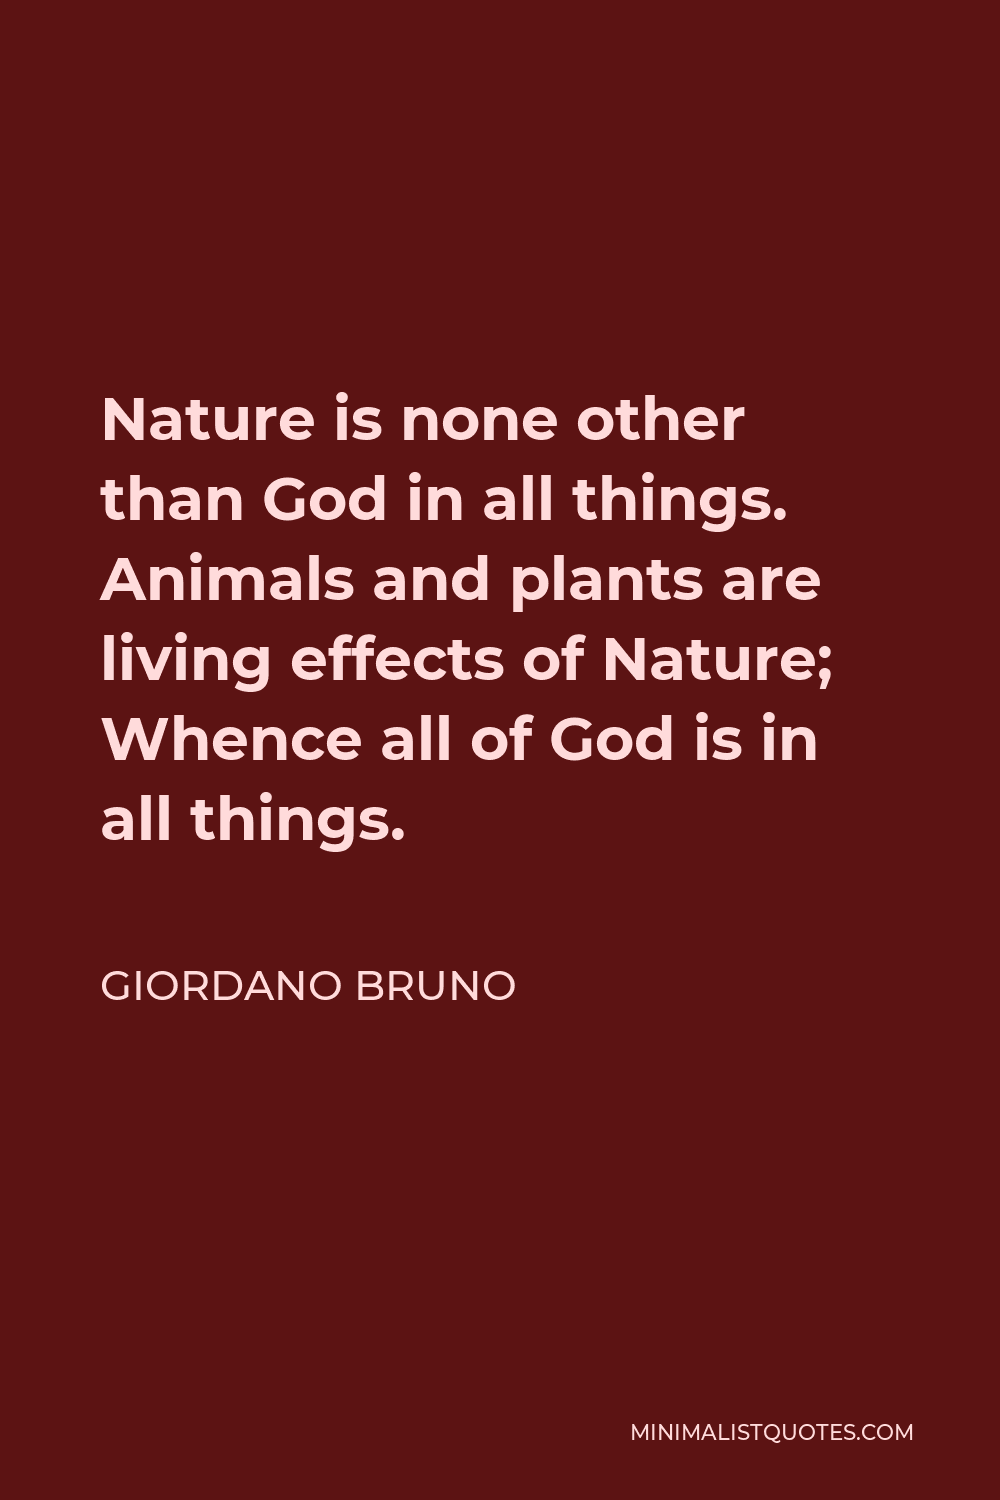 Giordano Bruno Quote - Nature is none other than God in all things. Animals and plants are living effects of Nature; Whence all of God is in all things.